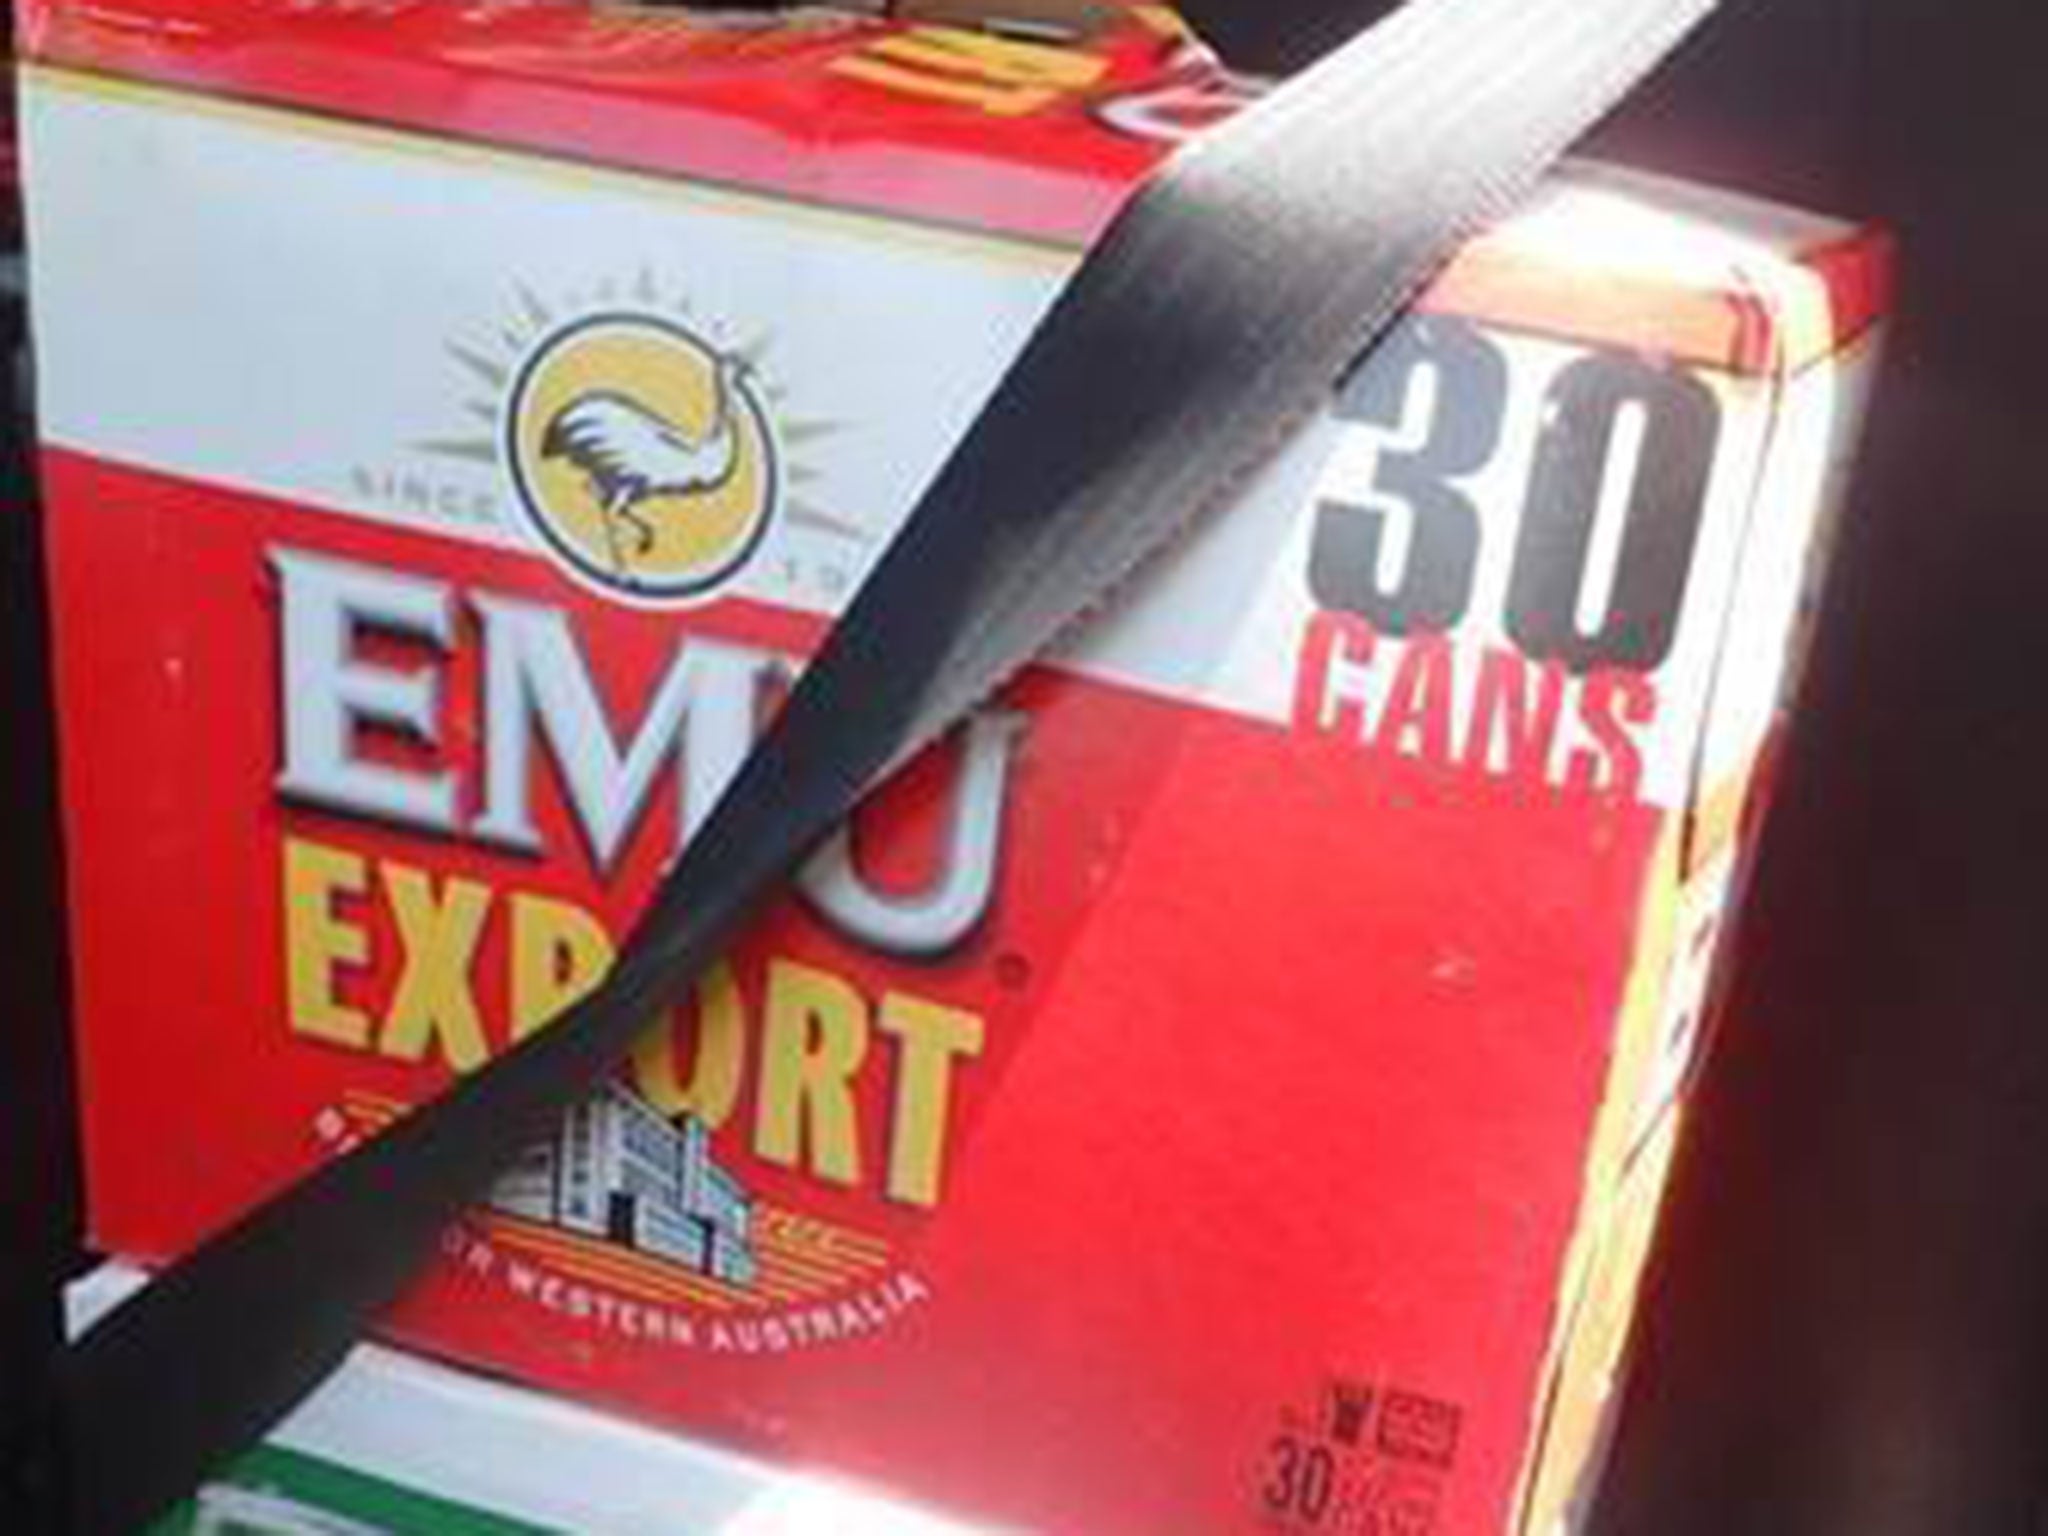 The 27-year-old man has been charged with no authority to drive and failure to restrain a child after strapping cartons of beer in to the seats while leaving children unrestrained